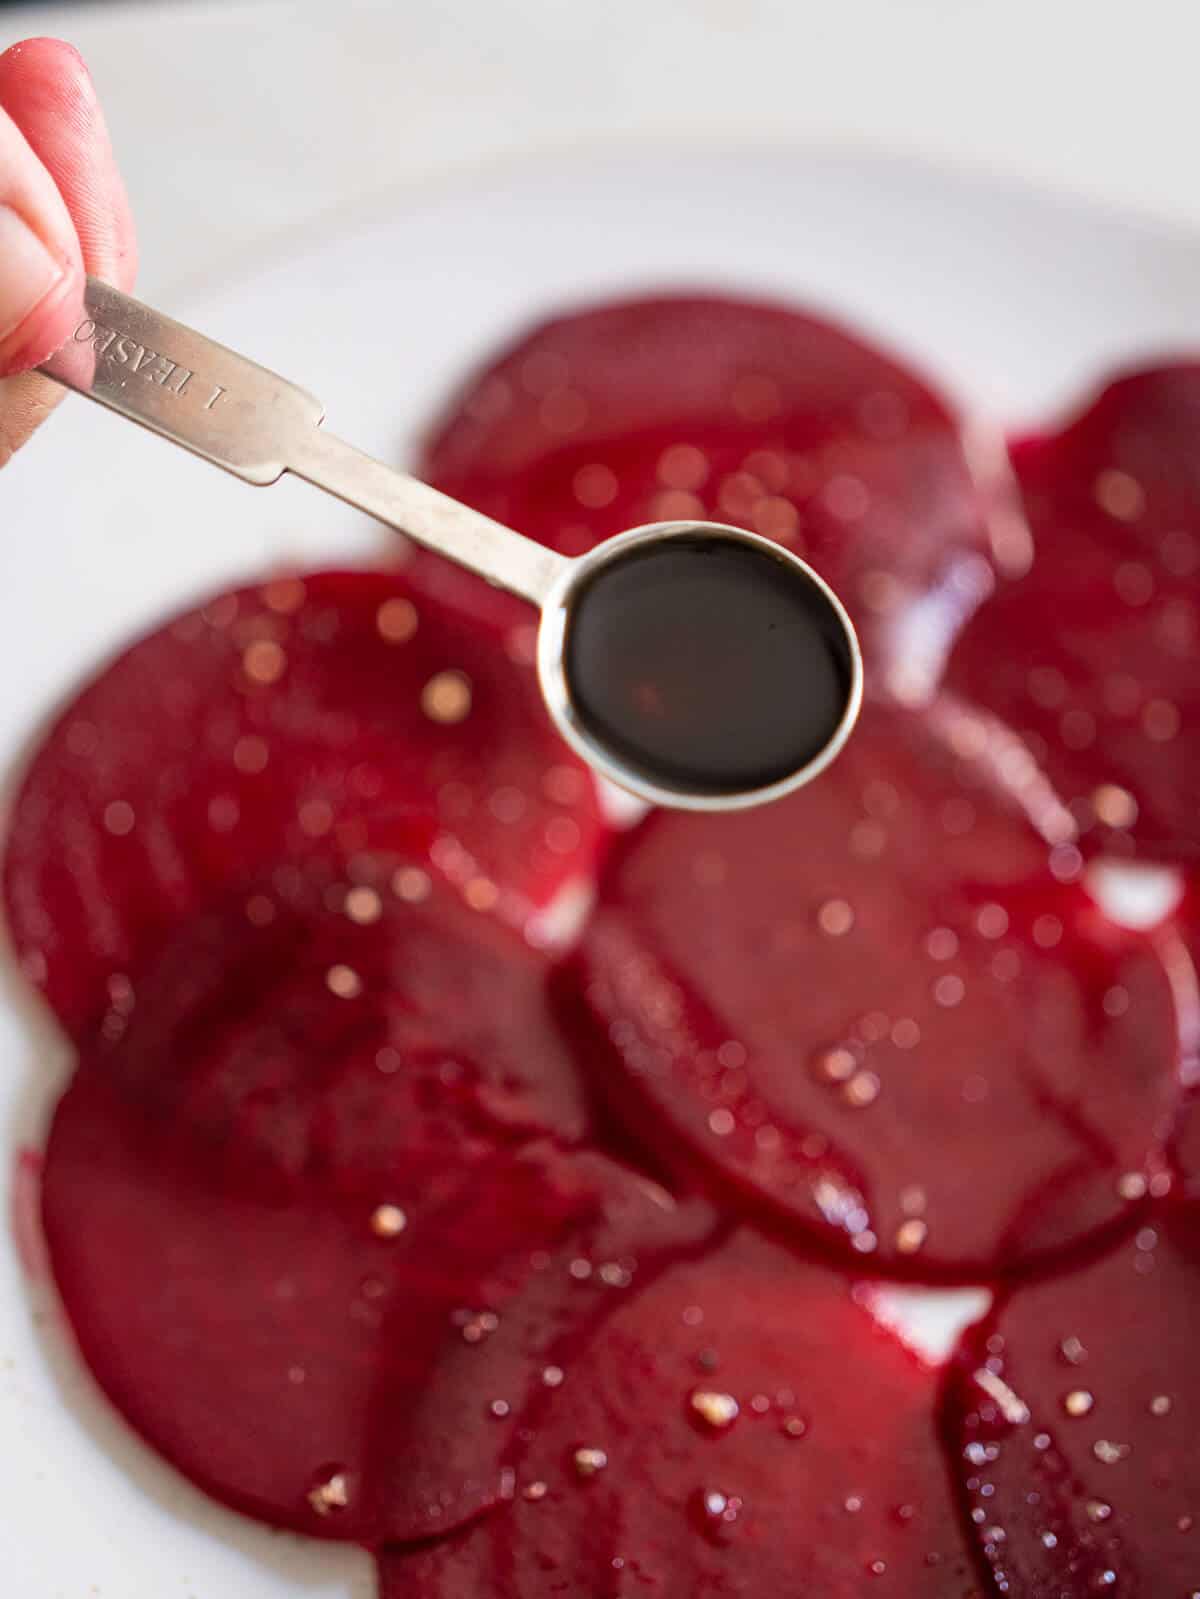 adding balsamic vinegar, salt and pepper to the layer or thinly sliced beets.